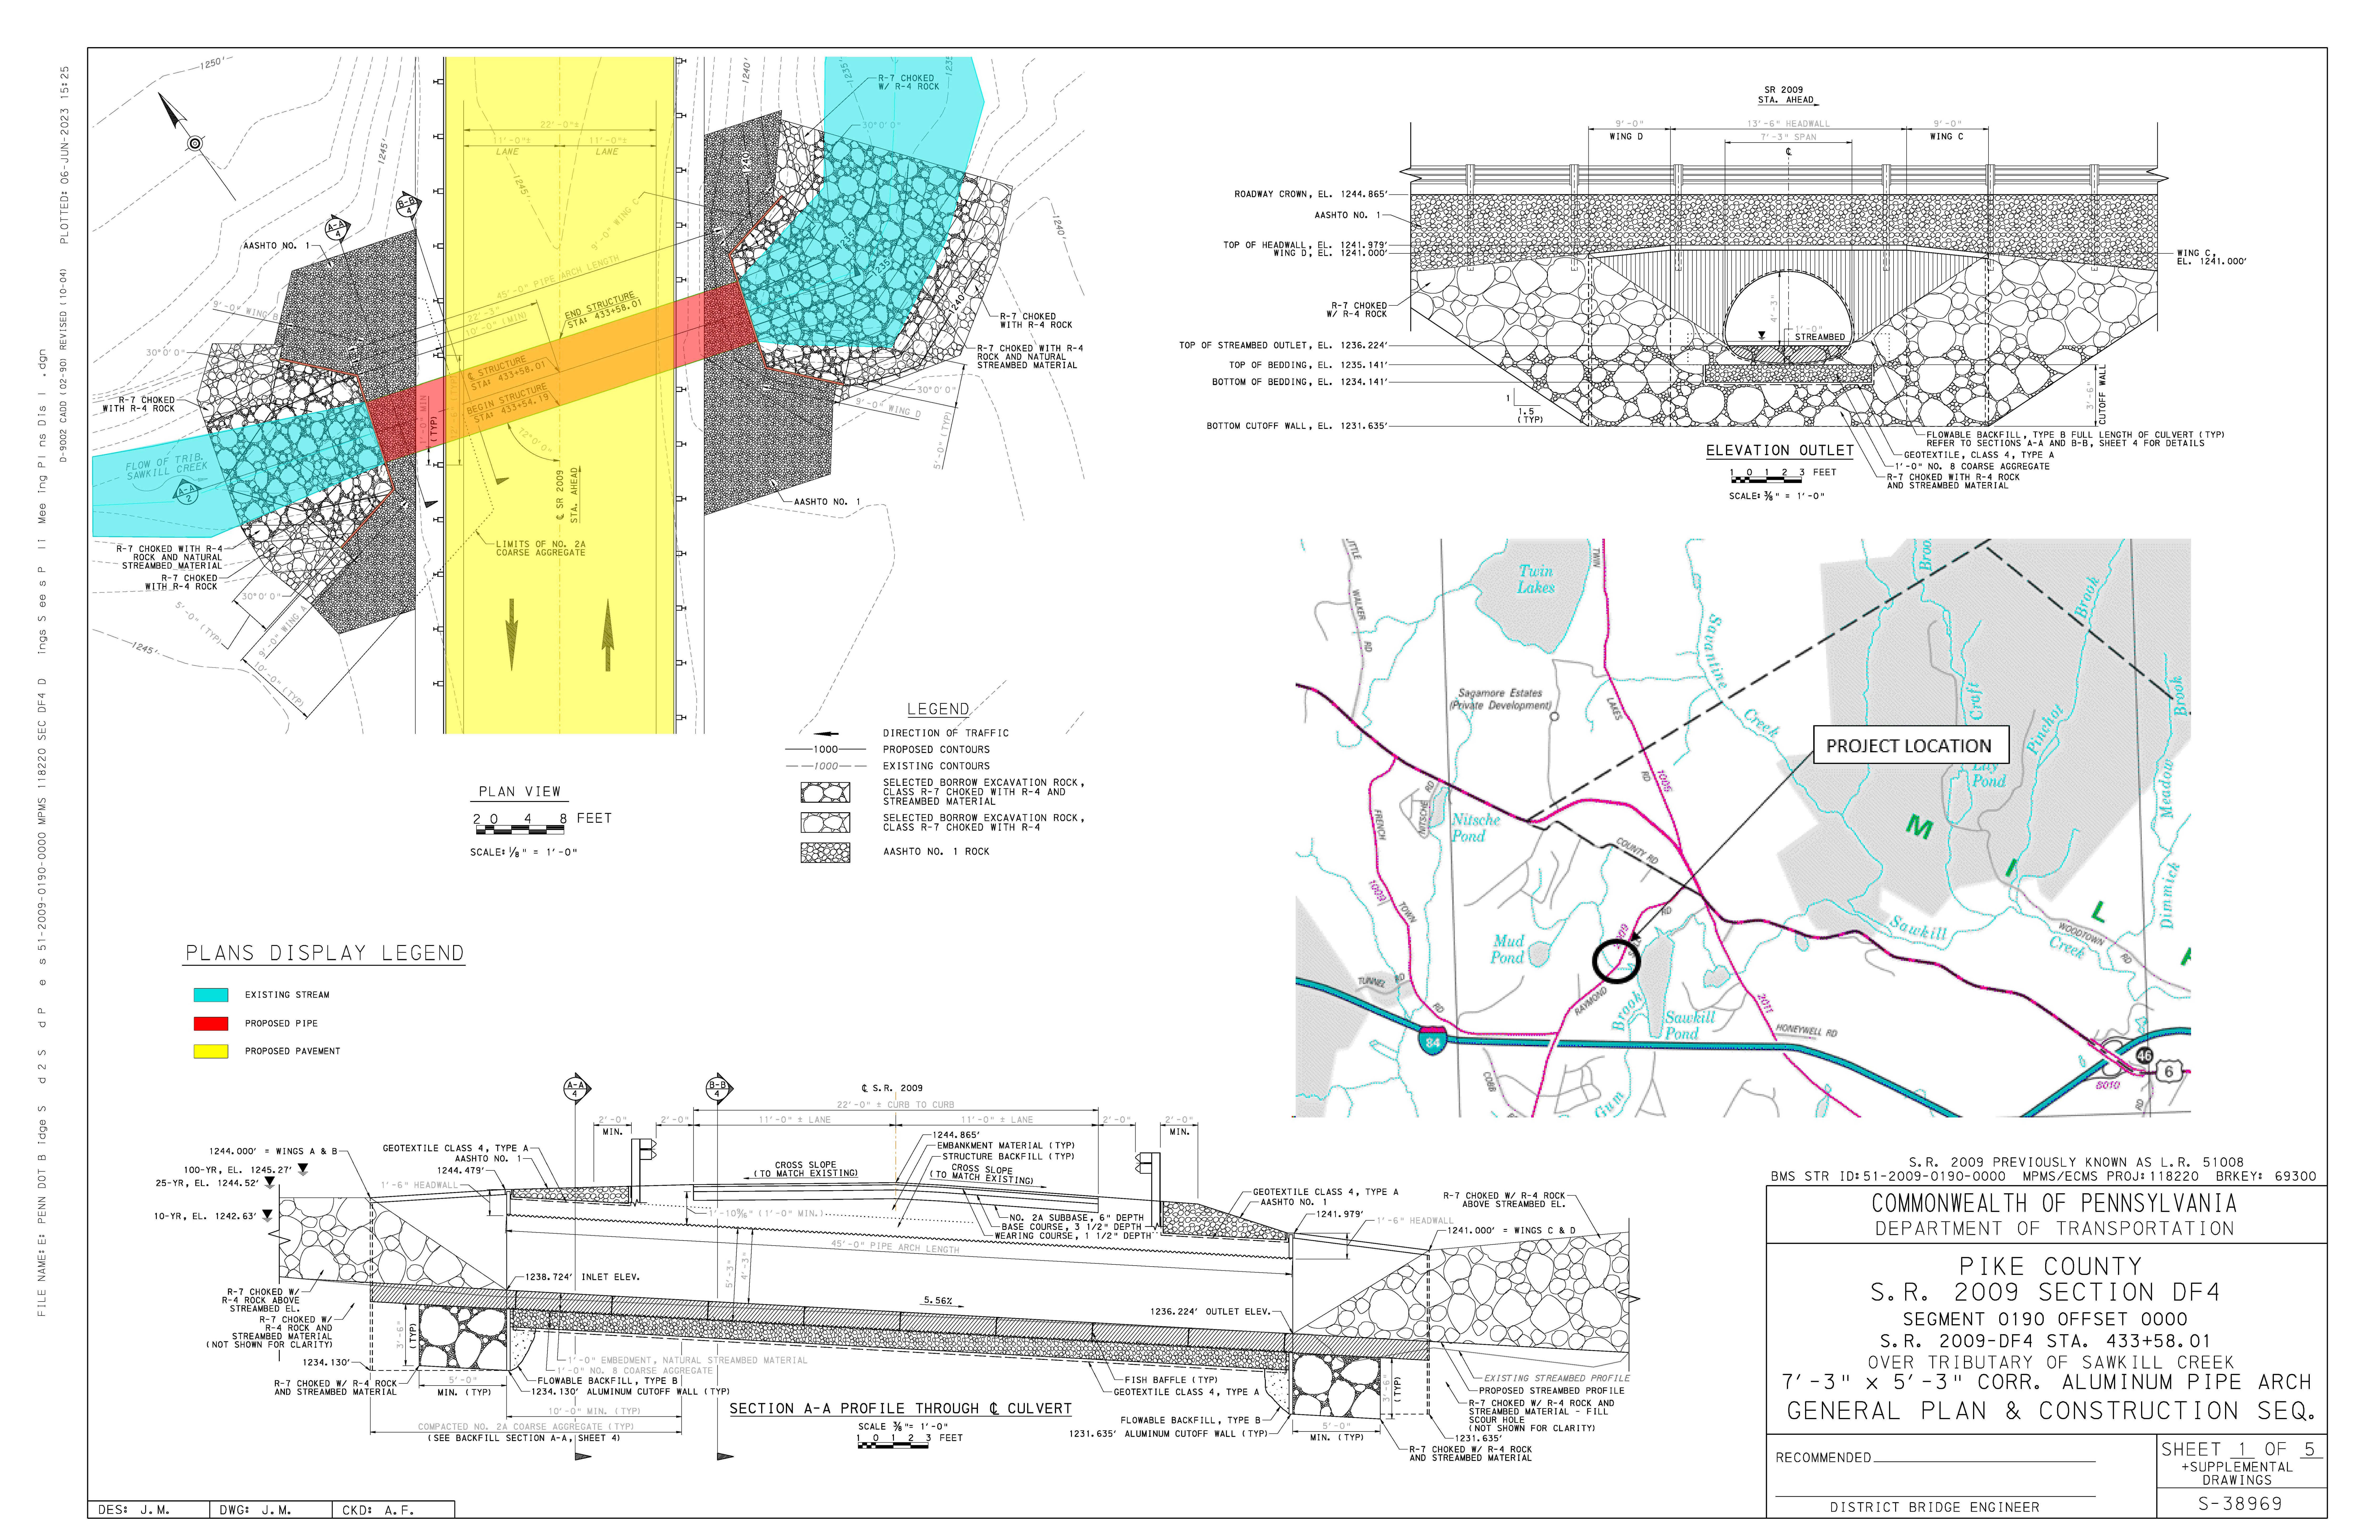 Design plans for the Route 2009 pipe replacement.